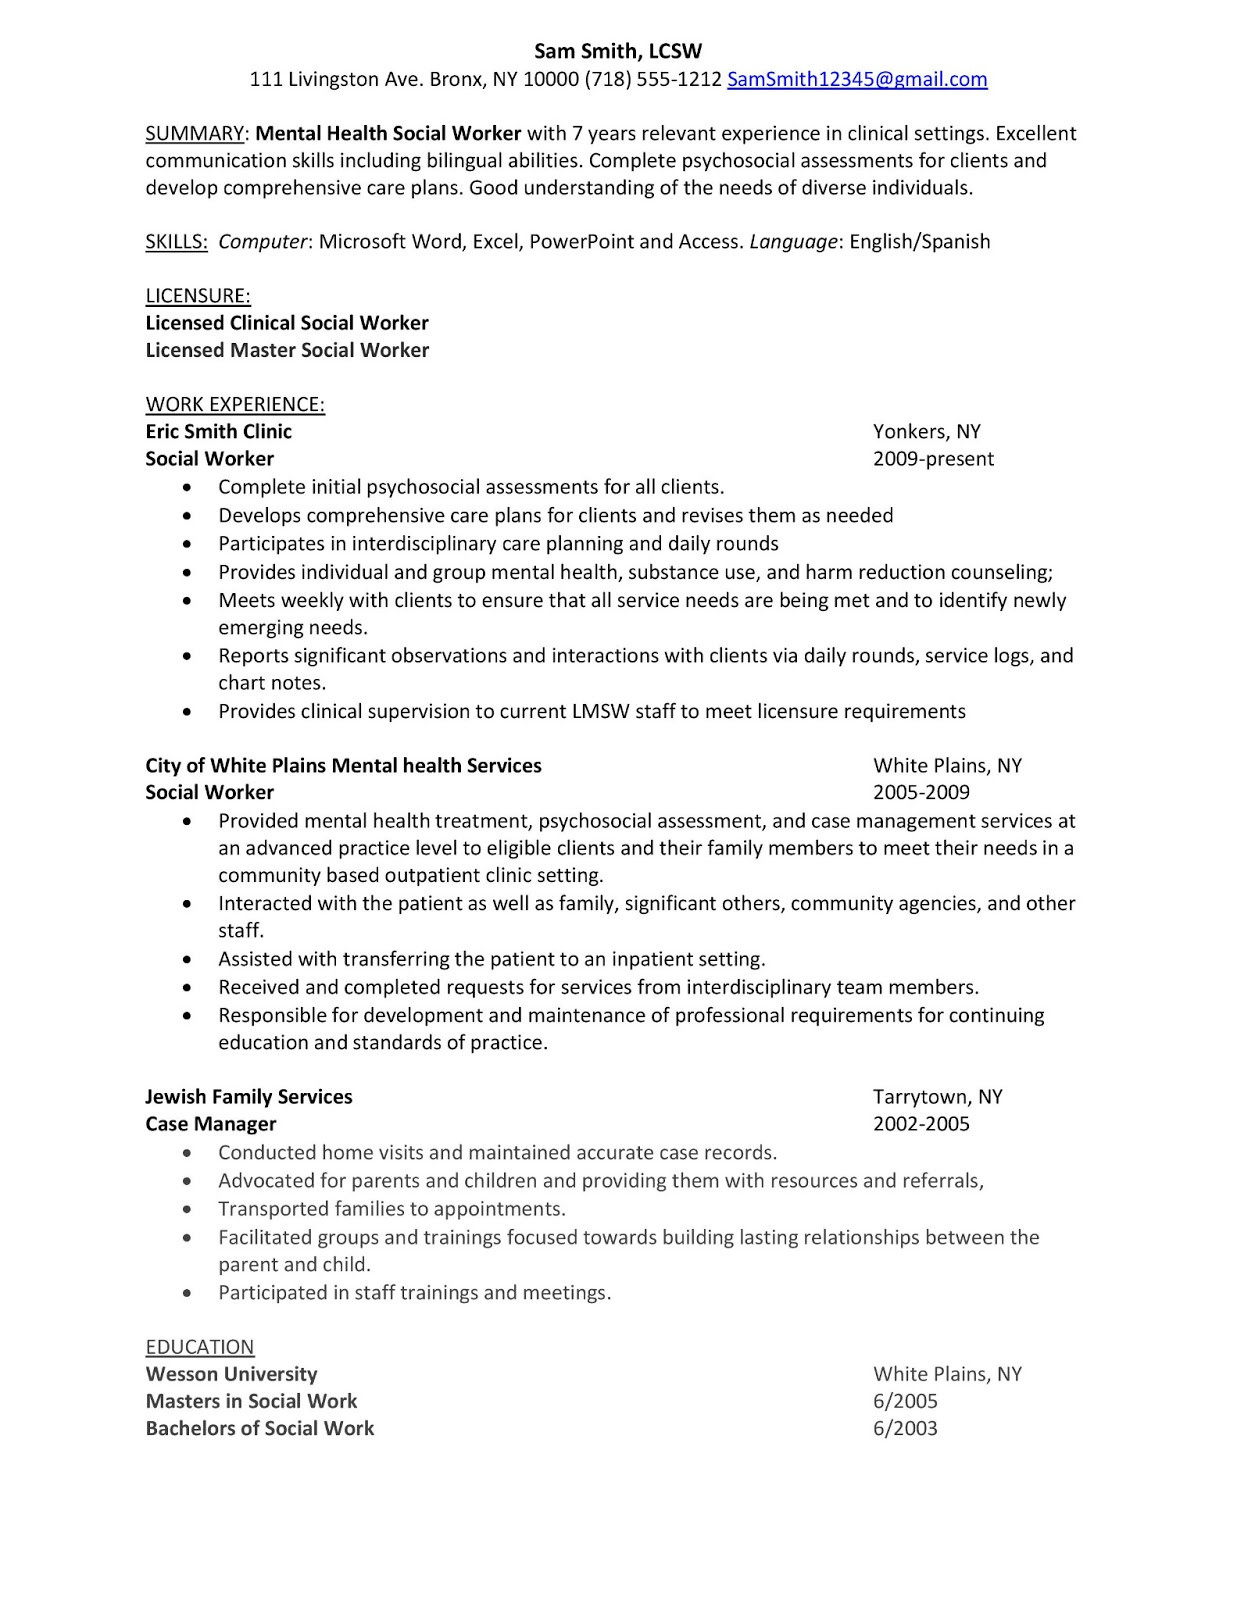 Clinical Mental Health Counseling Sample Resume Sample Resume: Mental Health social Worker Career Advice & Pro …